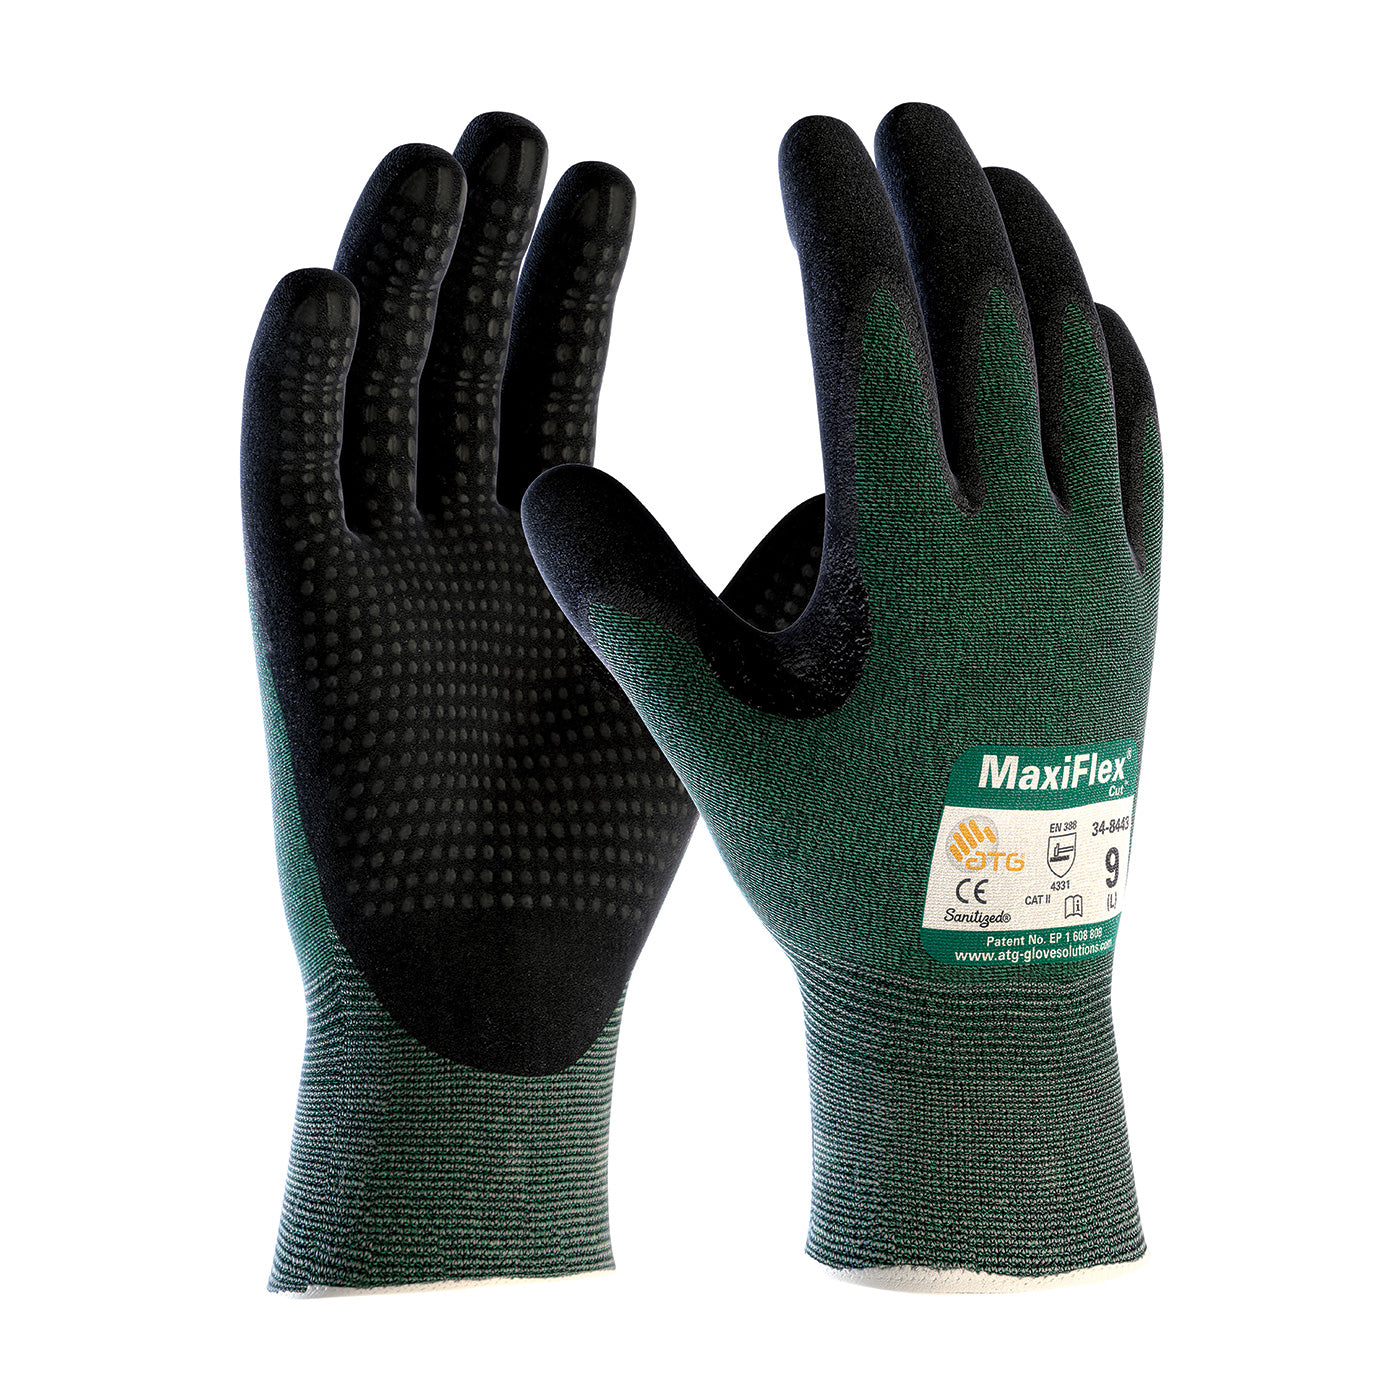 PIP 34-8443 MaxiFlex Cut Seamless Knit Gloves - Nitrile Coated Micro-Foam Dotted Grip (12 Pairs)-eSafety Supplies, Inc